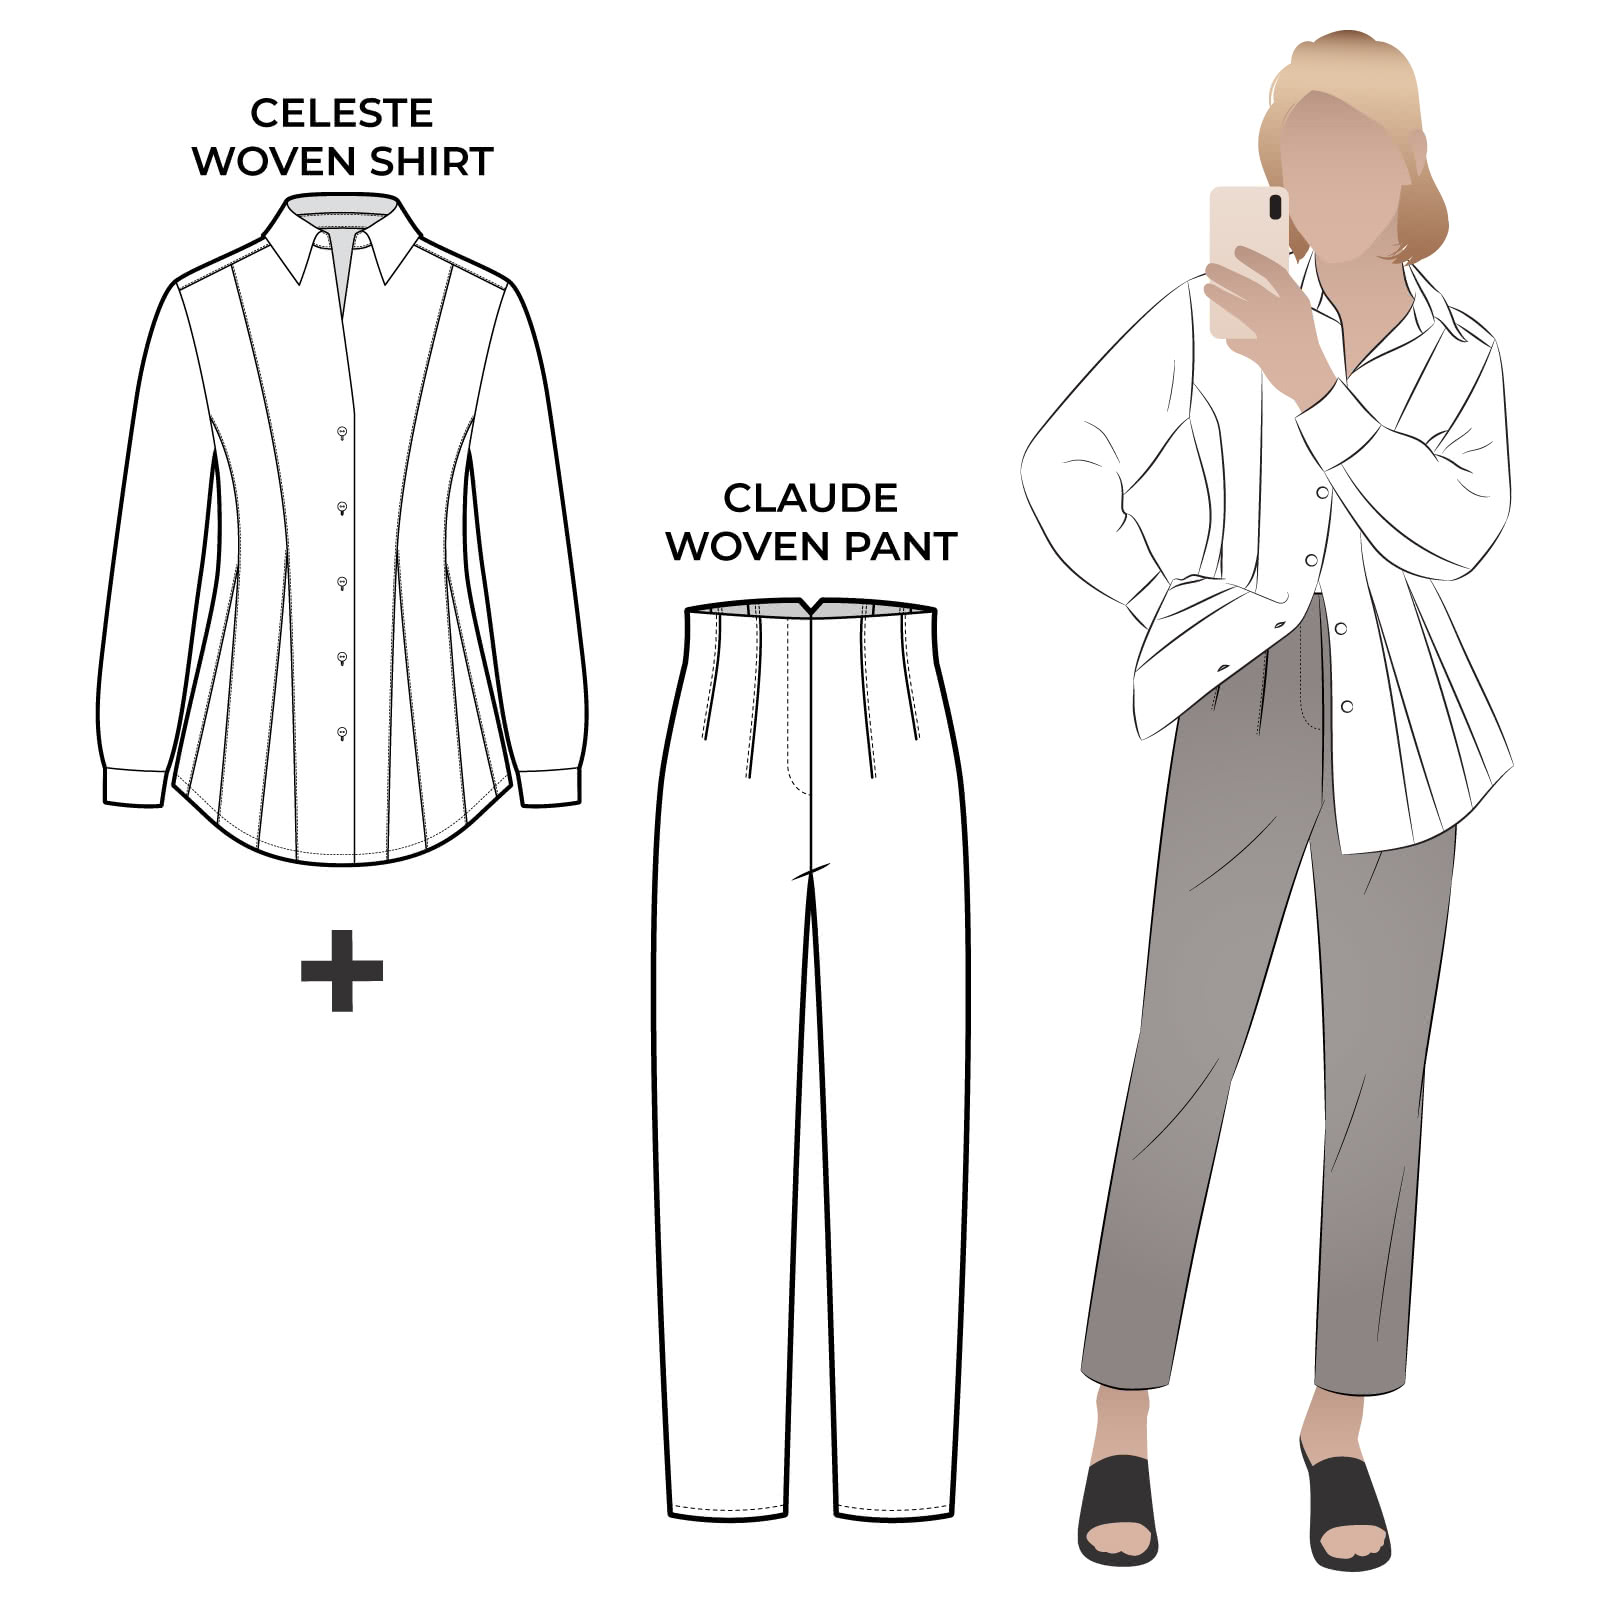 Celeste Woven Shirt + Claude Woven Pant Sewing Pattern Bundle By Style Arc - Shirt and pant pattern bundle inspired by tailored elegance.